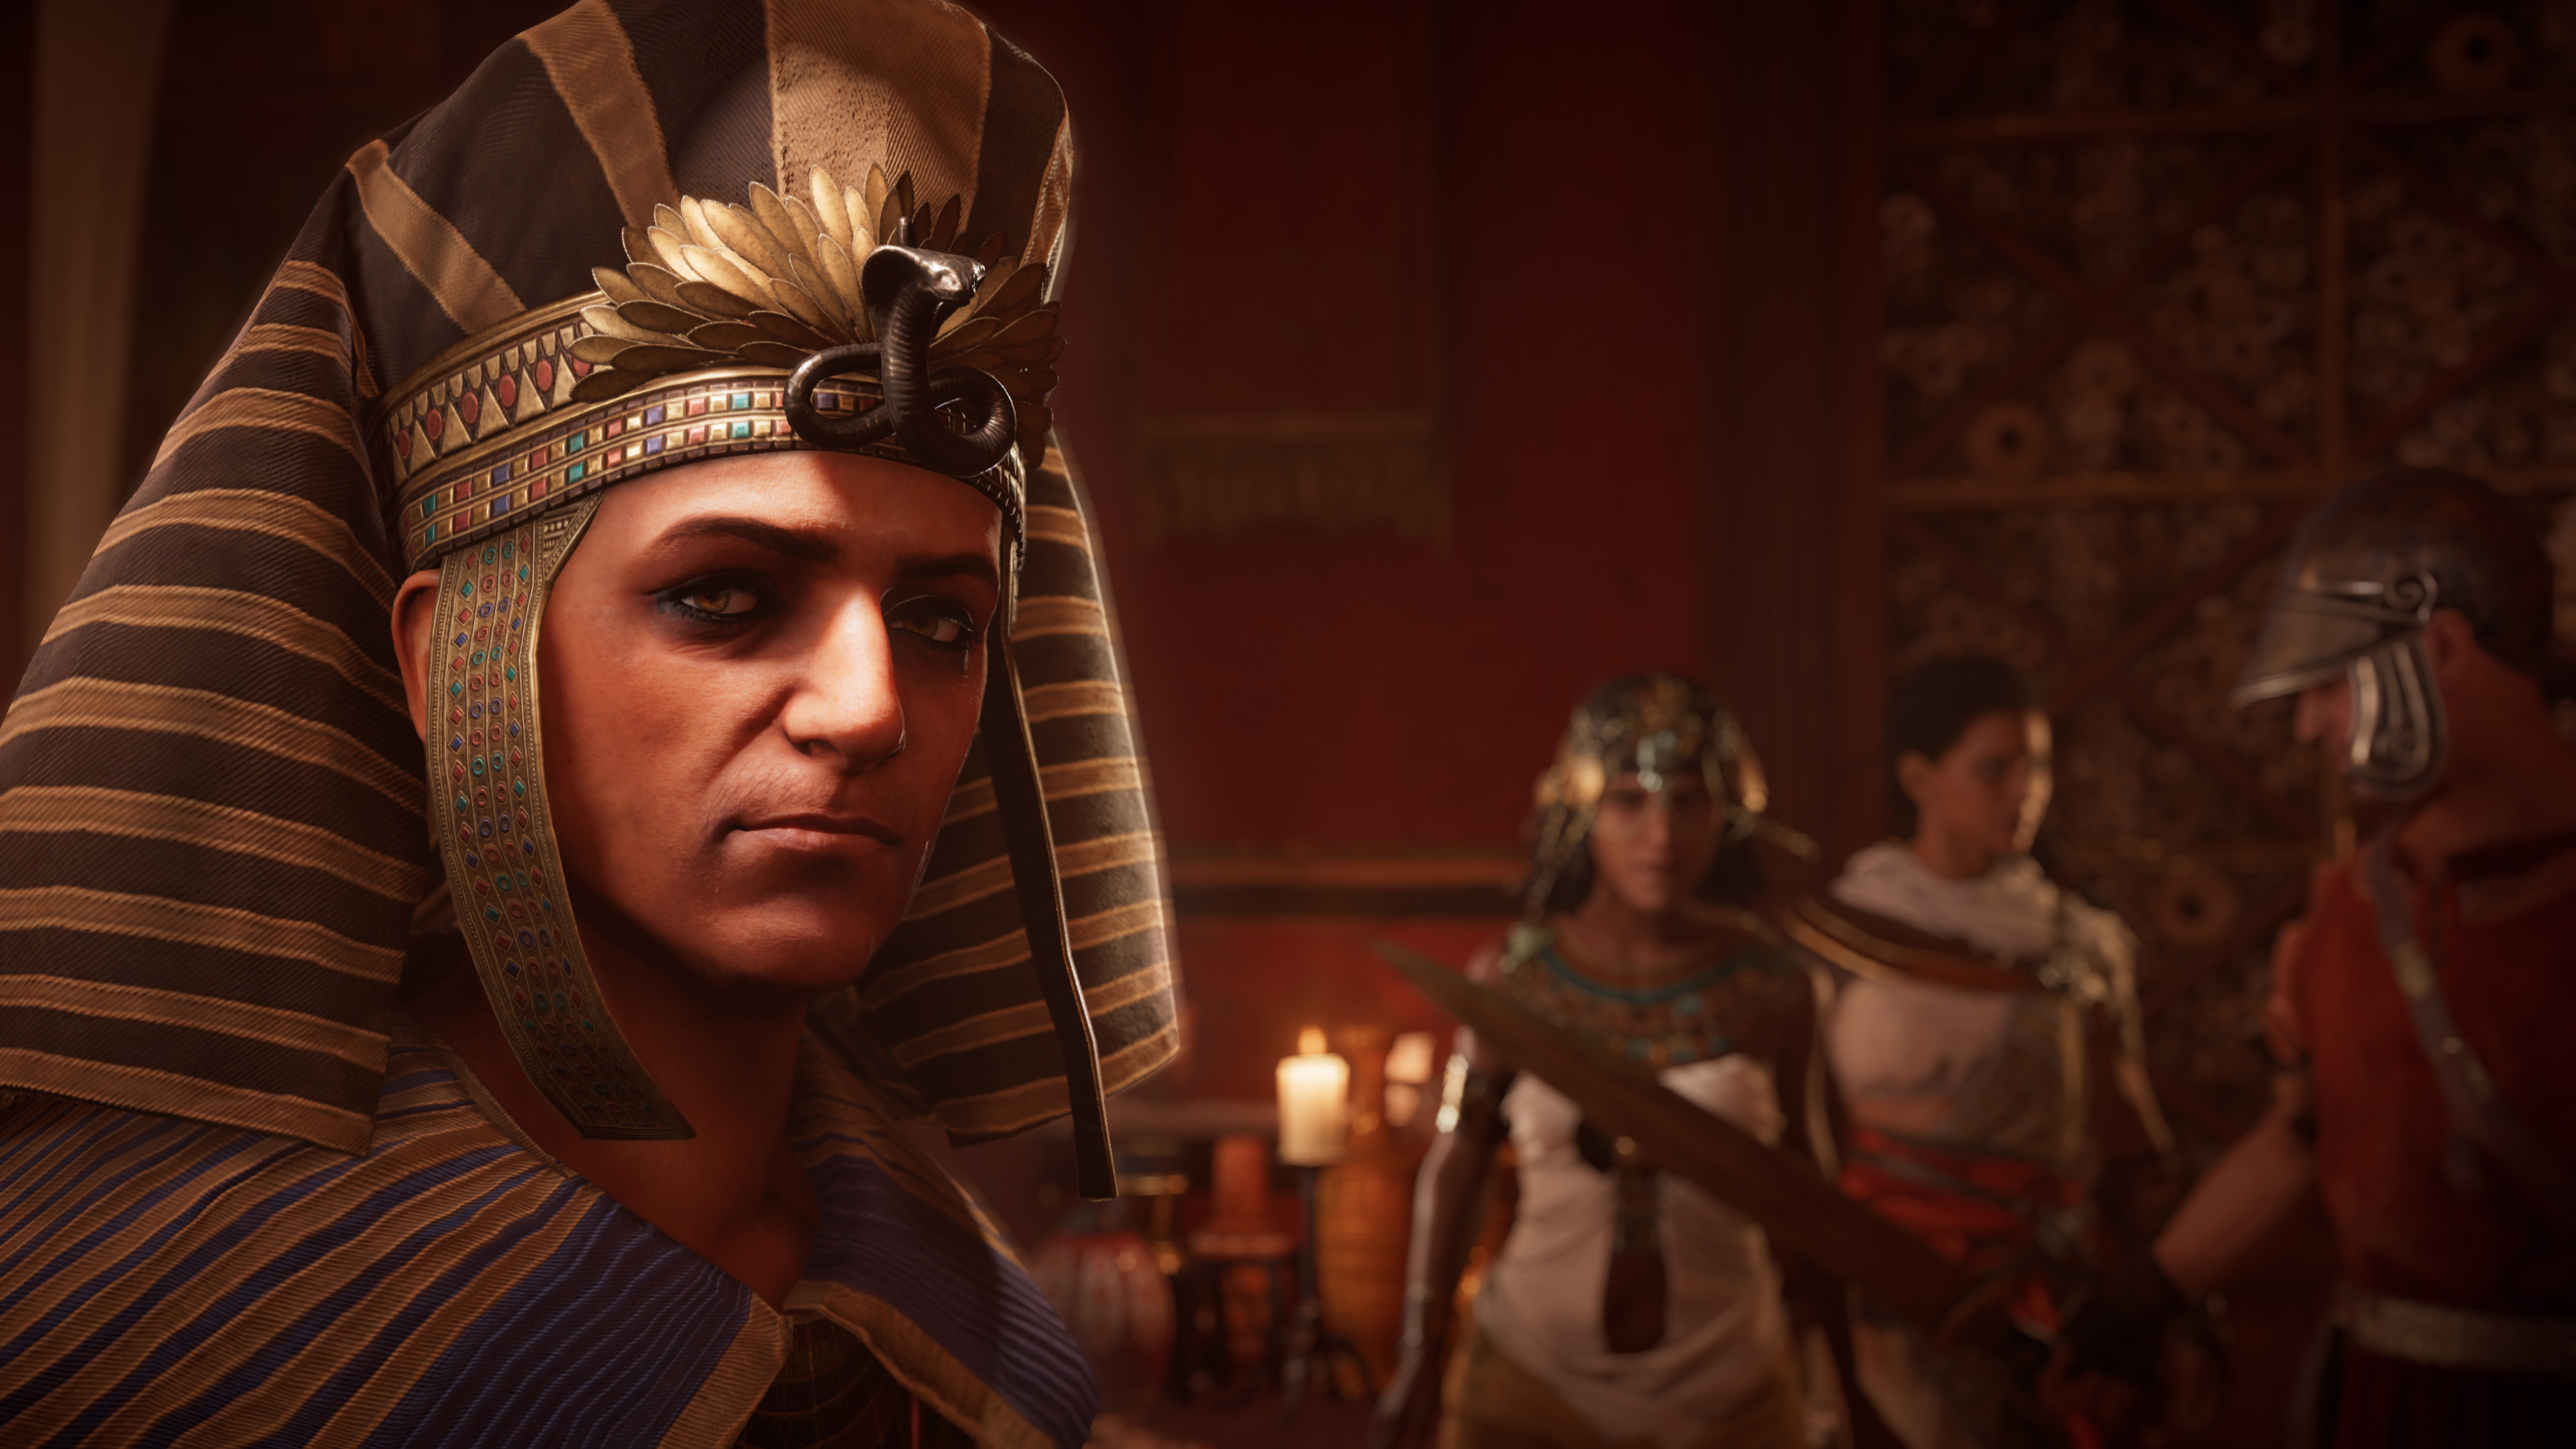 Media asset in full size related to 3dfxzone.it news item entitled as follows: Ubisoft pubblica lo story trailer e screenshot in 4K di Assassin's Creed Origins | Image Name: news26902_Assassin-s-Creed-Origins-Screenshot_3.jpg